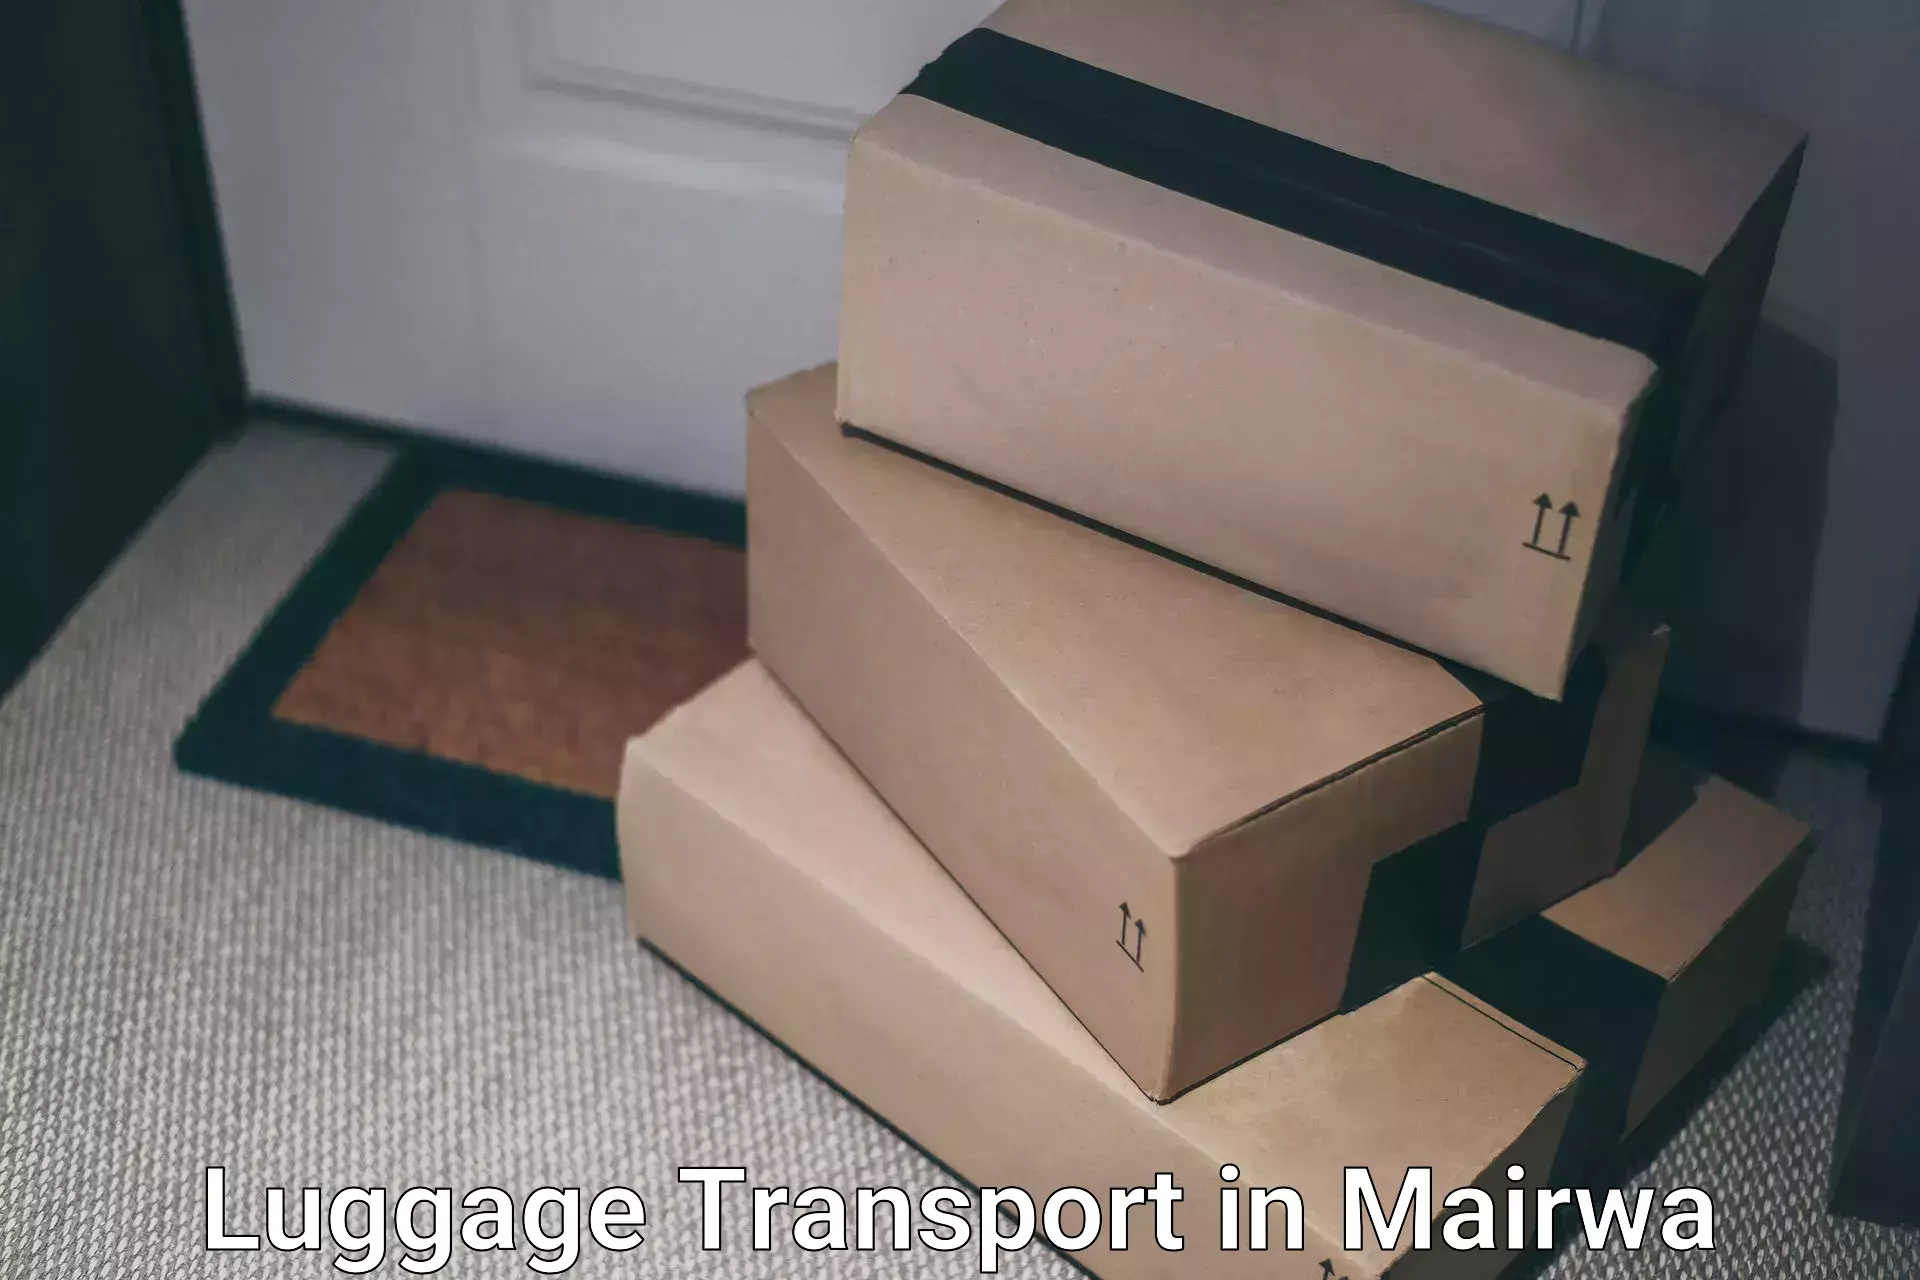 Luggage transfer service in Mairwa